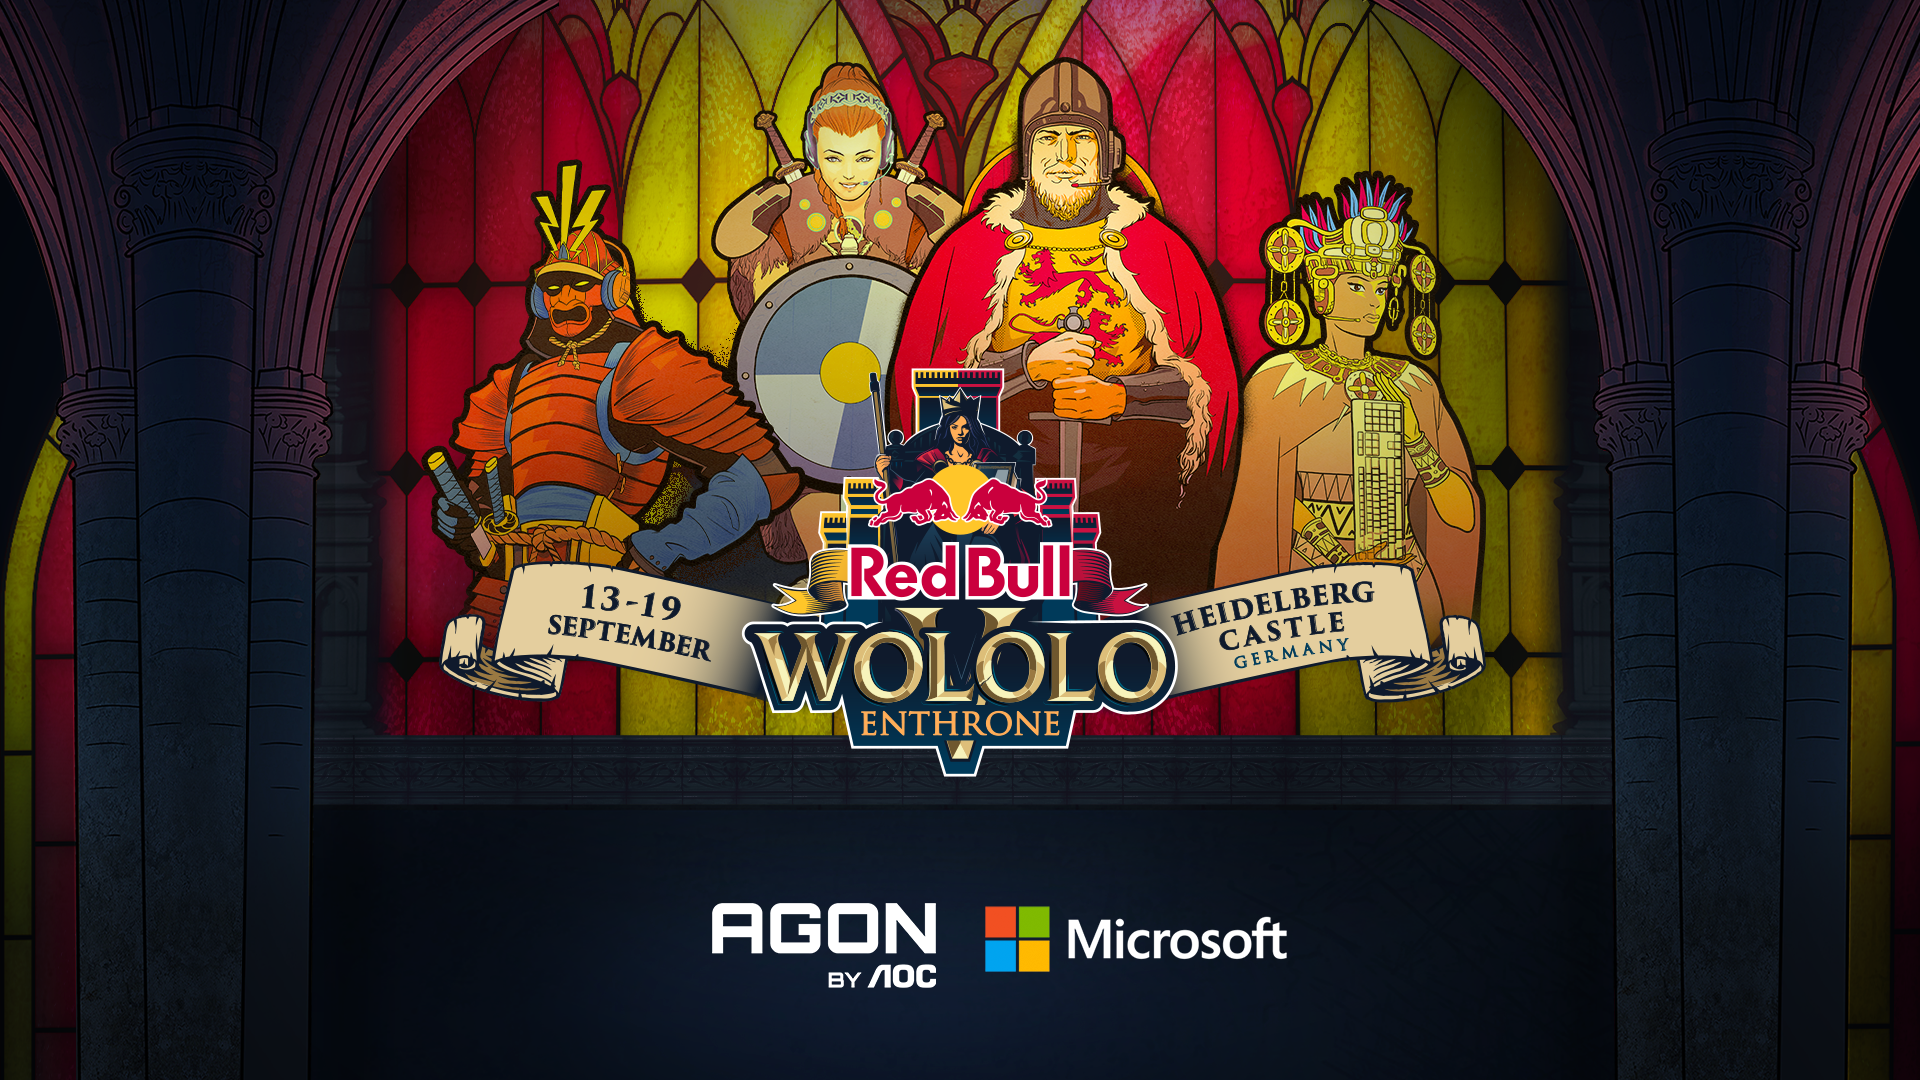 Age of Empires II: Definitive Edition - Red Bull Wololo V: Sign up now -  Steam News